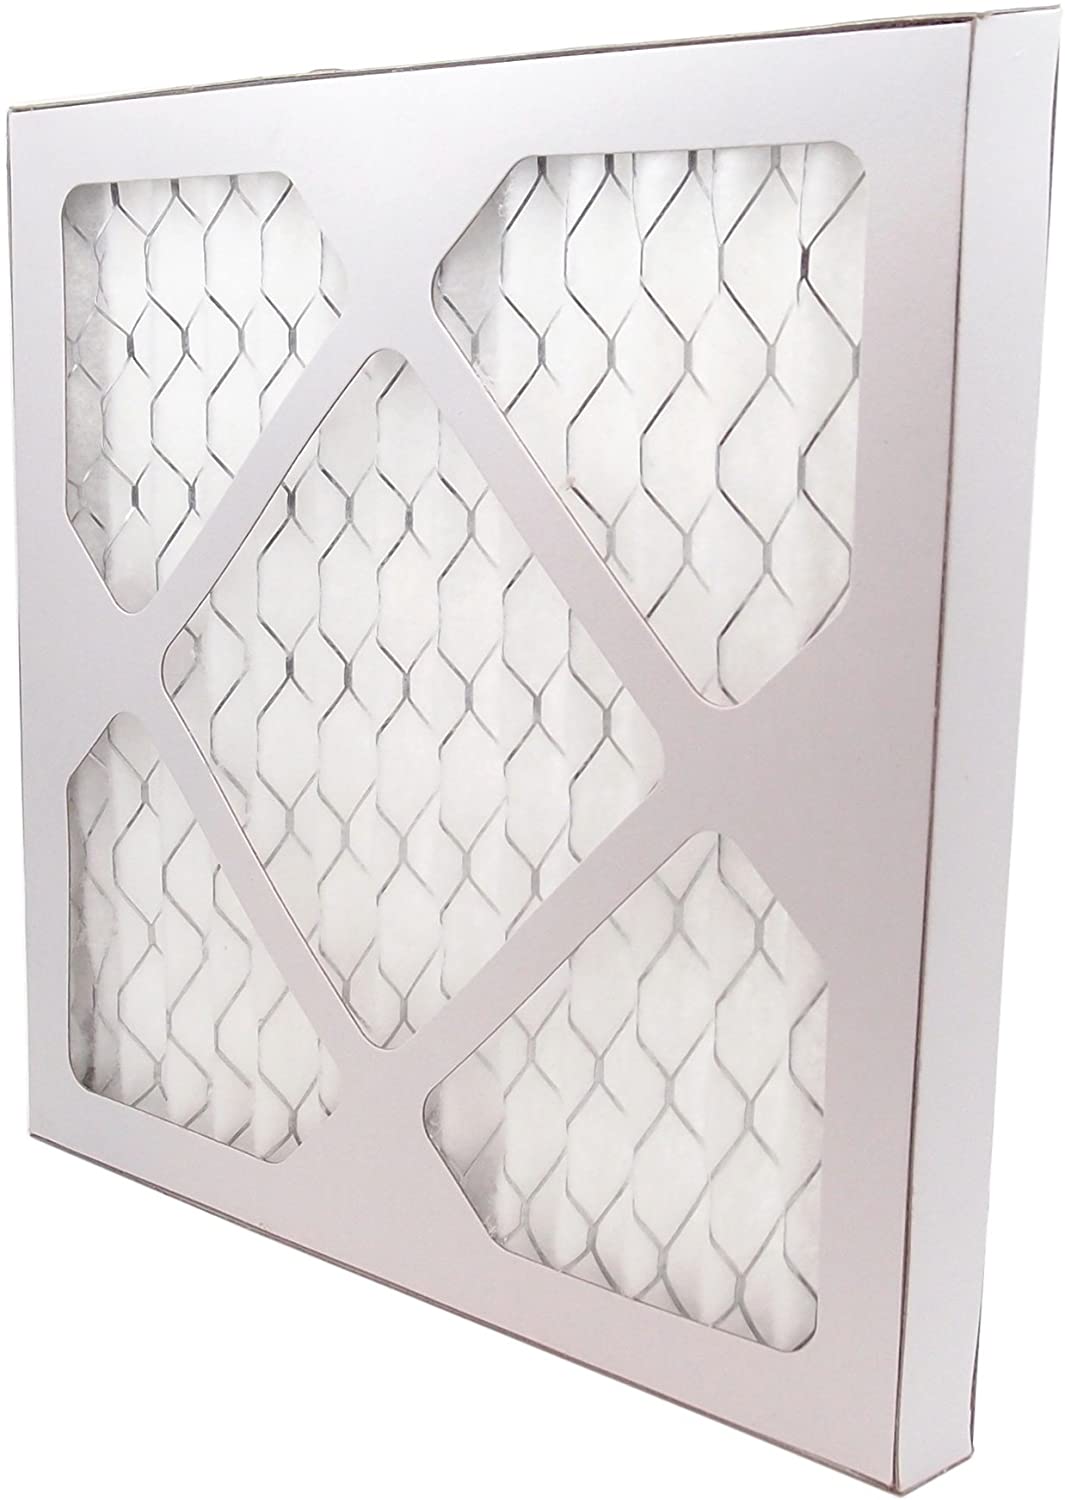 22&quot; x 12&quot; Pleated MERV 8 Filter for HVAC Return Filter Grille [Actual Dimensions: 21.75 X 11.75] 3-Pack